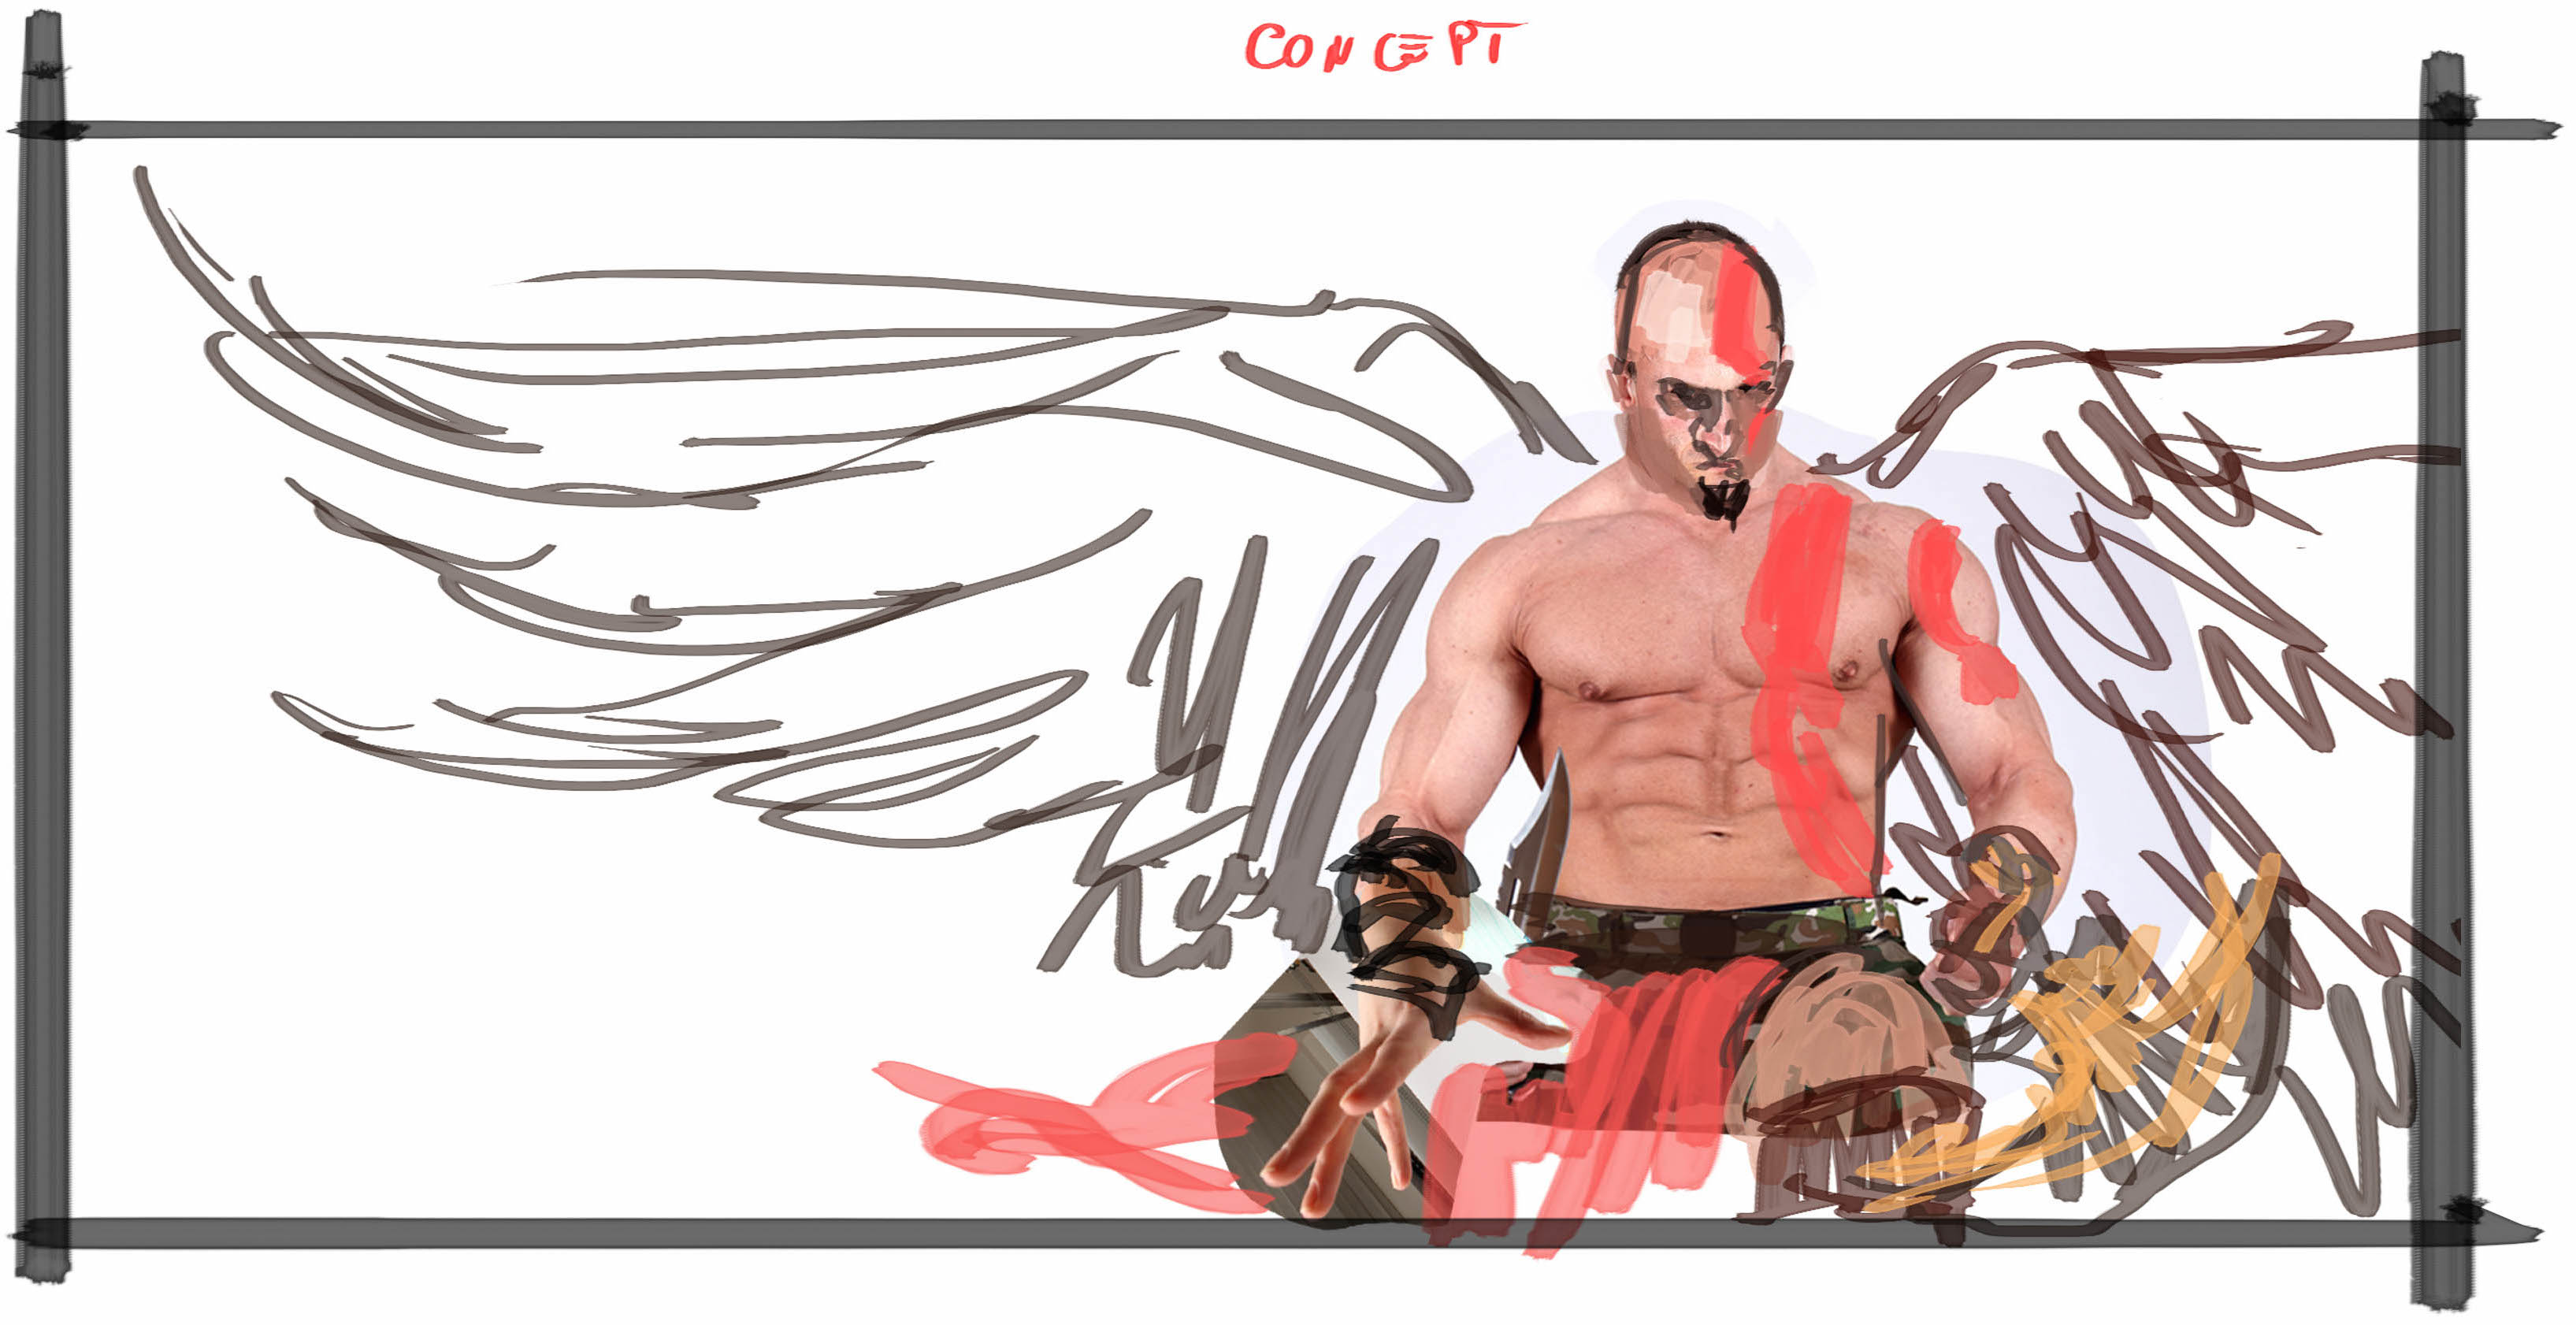 god of war drawings step by step